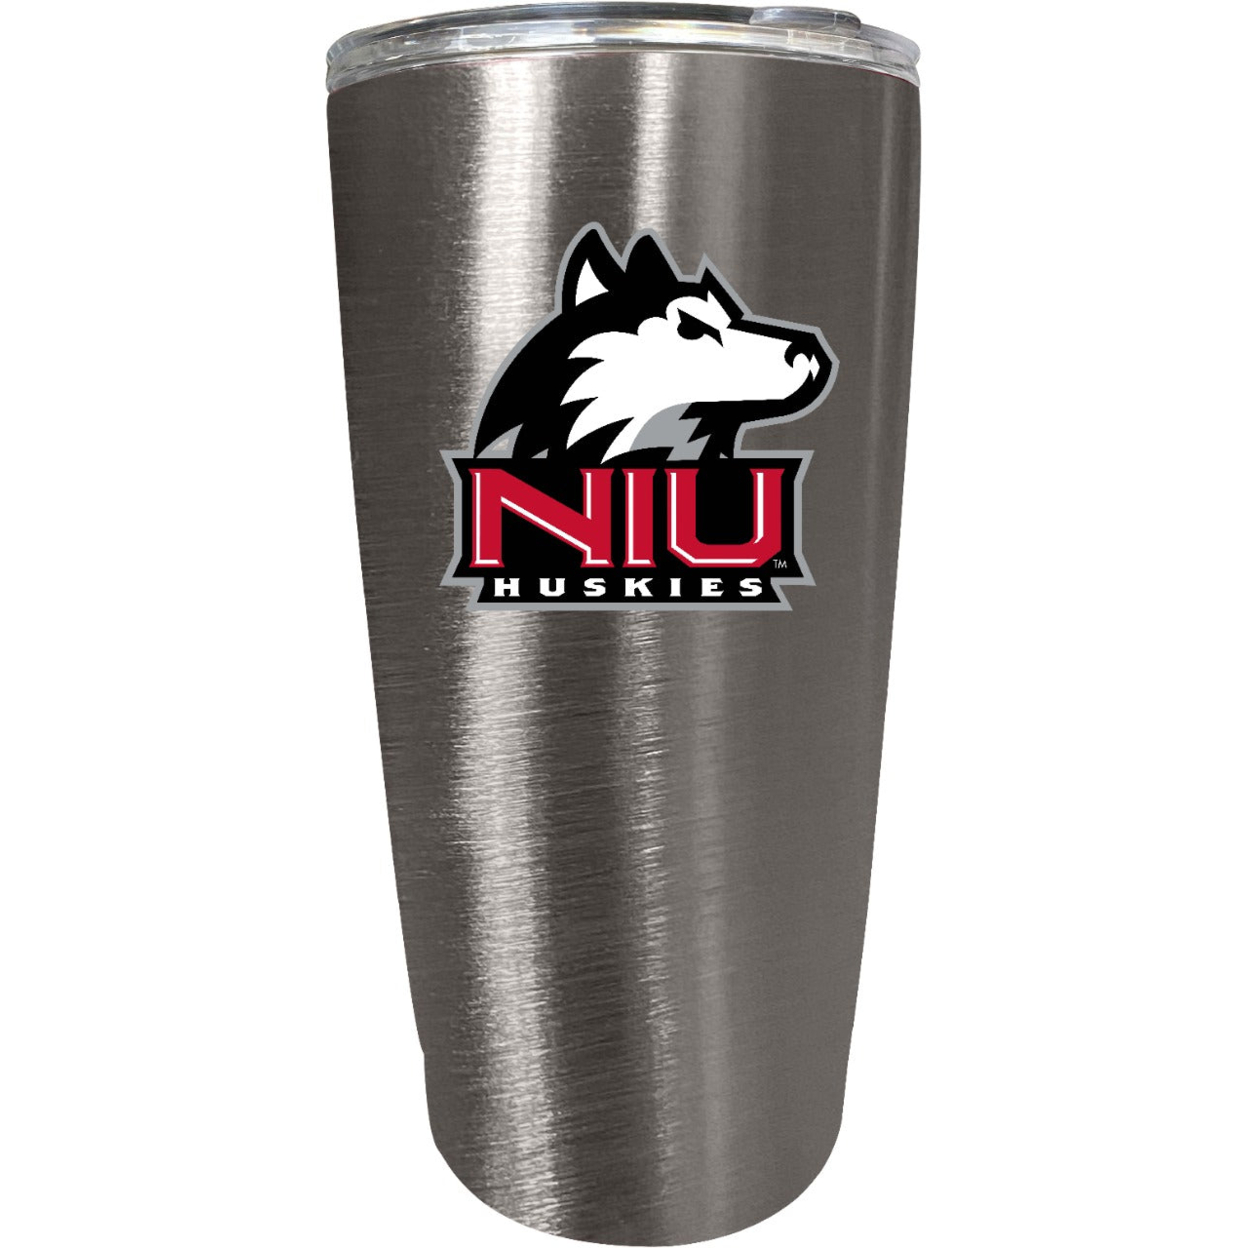 Northern Illinois Huskies 16 Oz Insulated Stainless Steel Tumbler Colorless